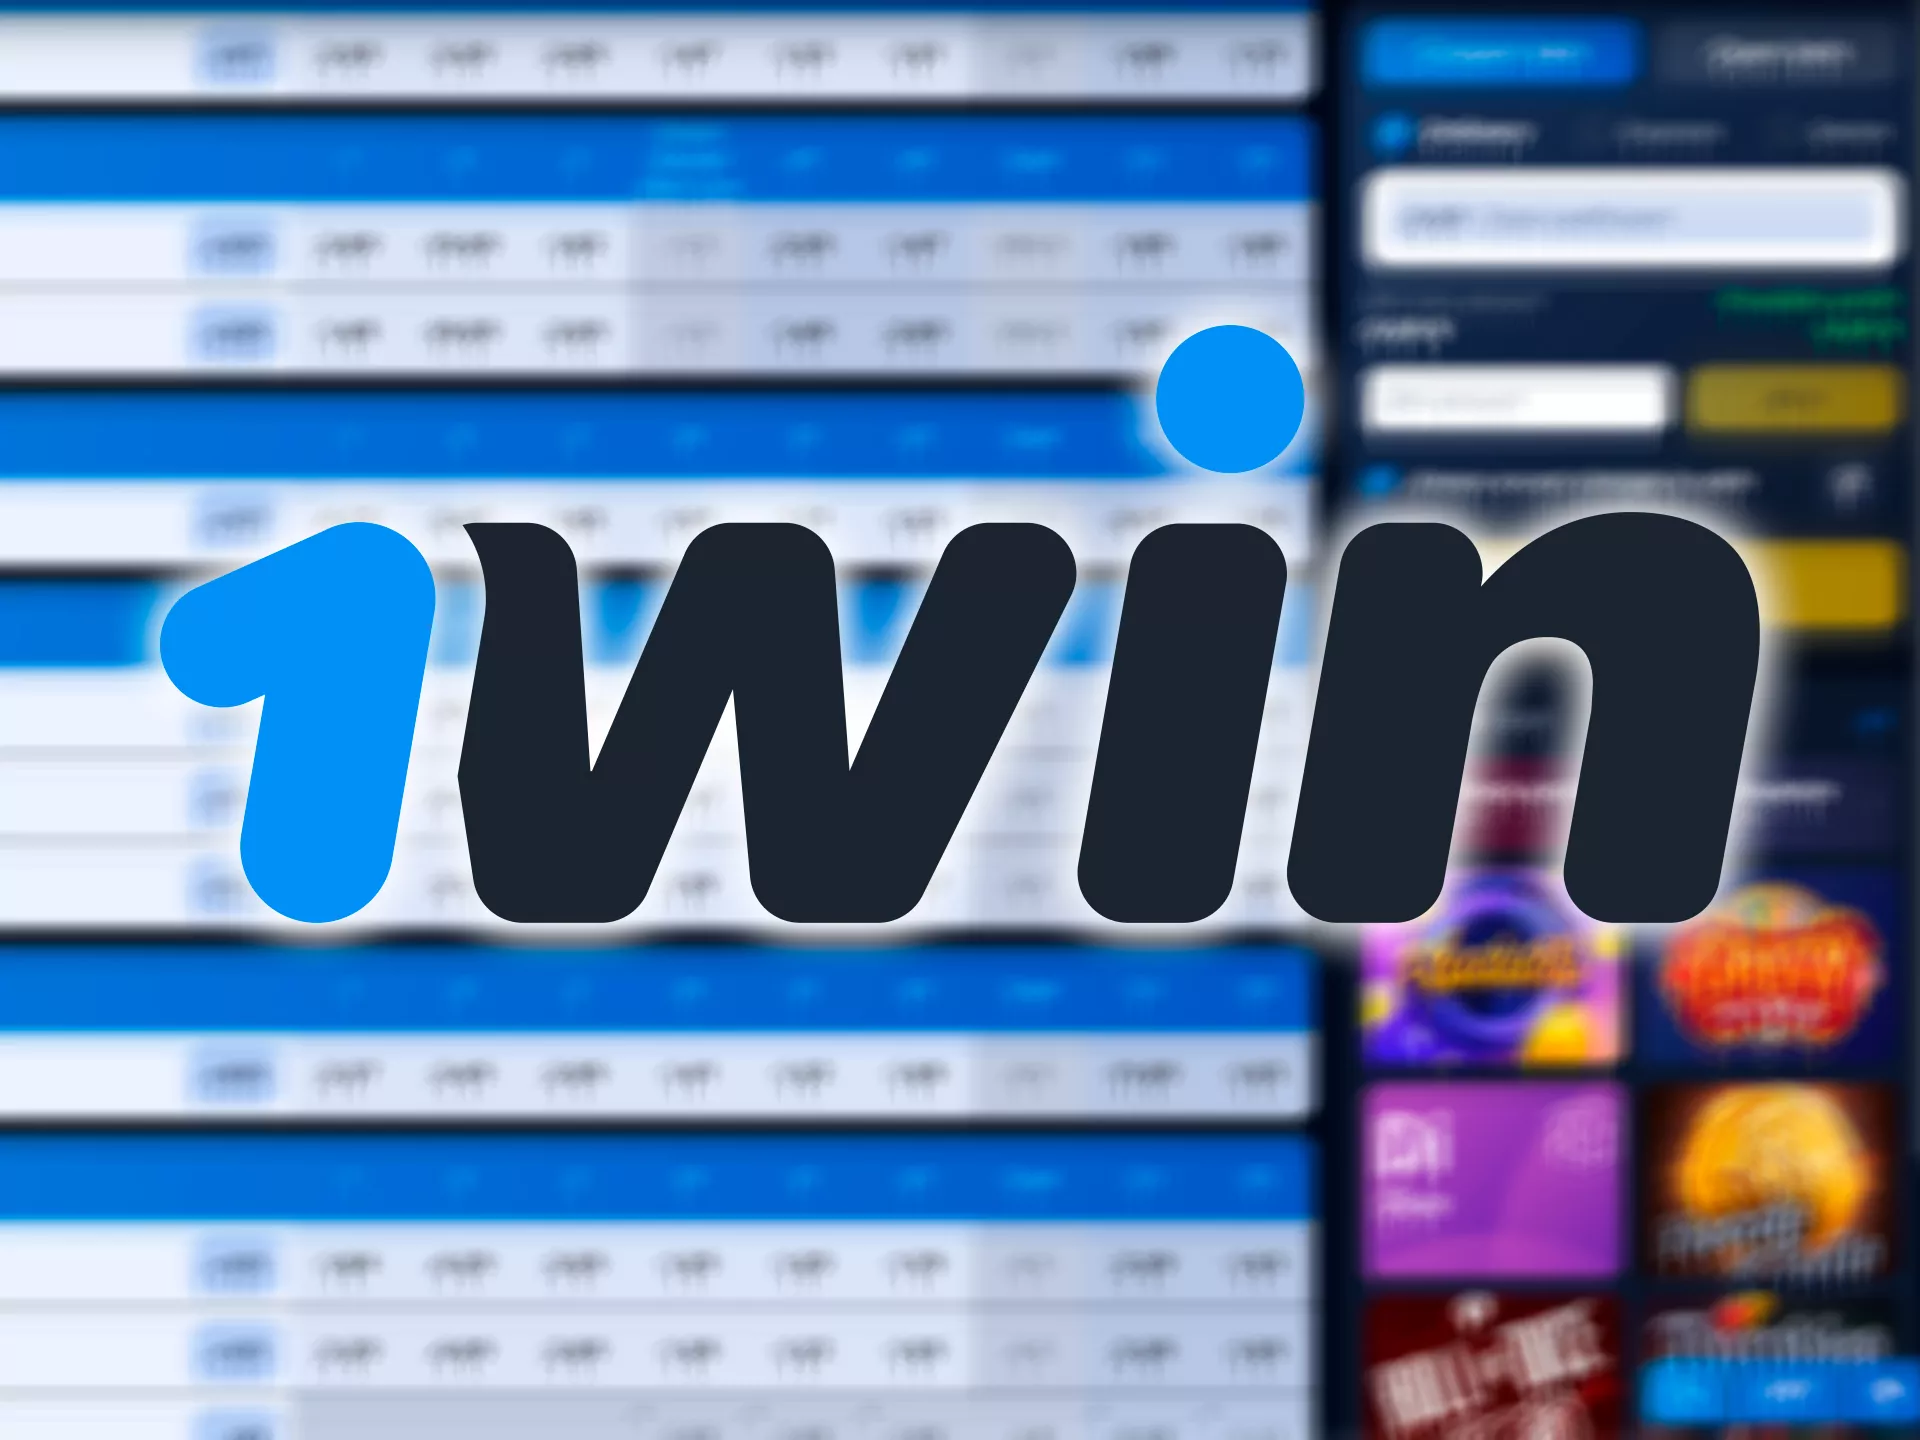 1win minimum withdrawal - What To Do When Rejected